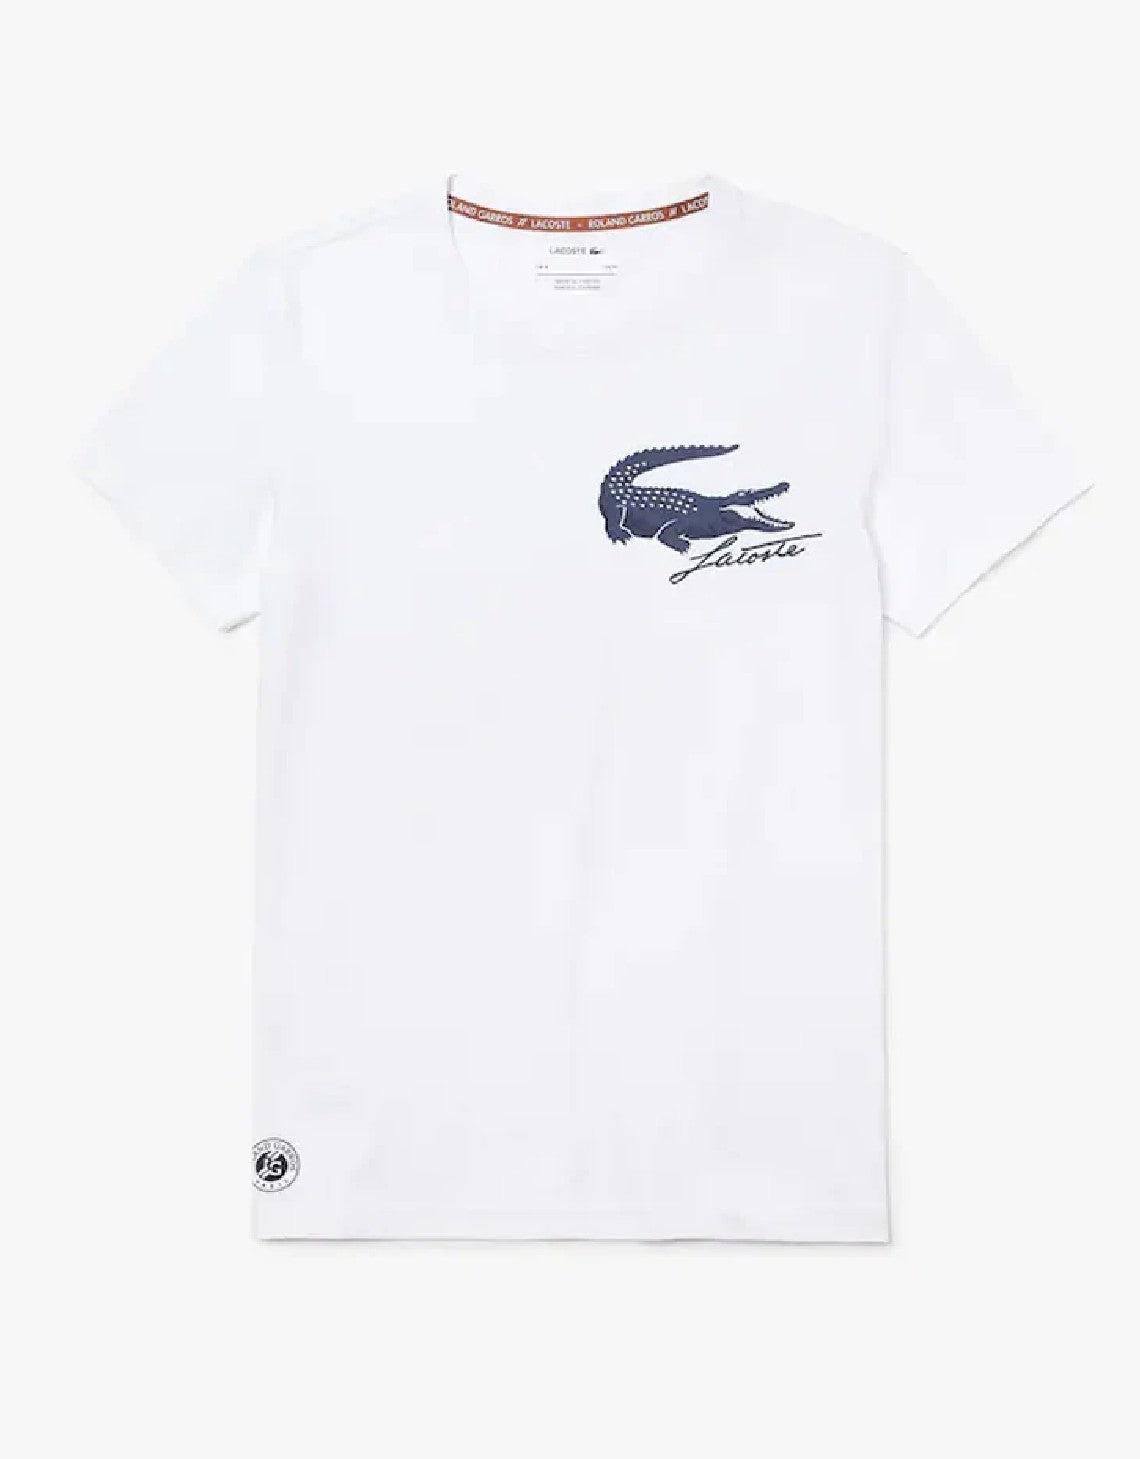 Lacoste Sport French Open Edition Crocodile Print T-shirt White Navy Blue  for Men | Lyst